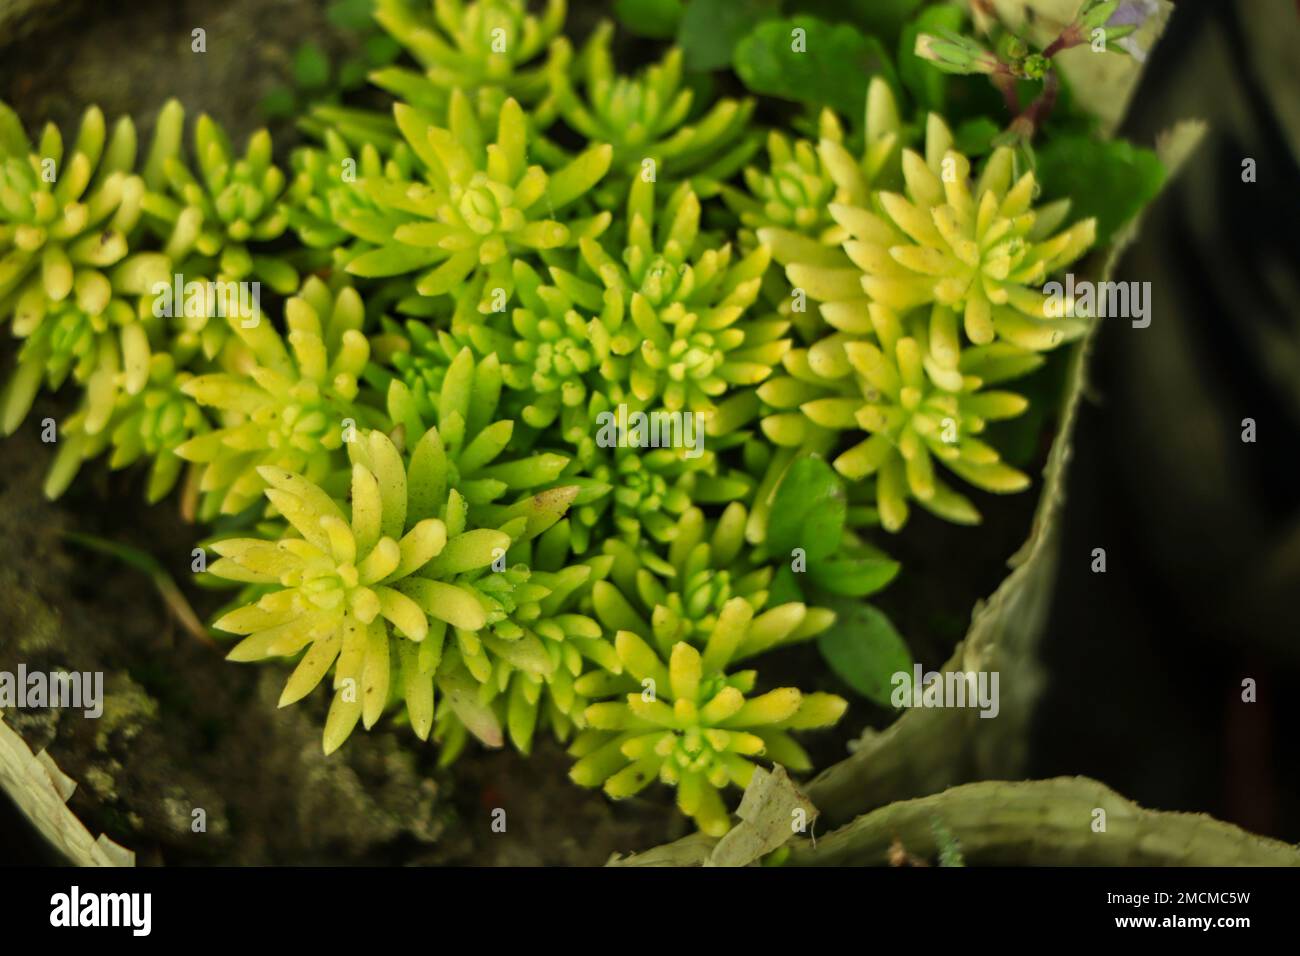 shoots of Sedum album 'Coral Carpet', also known as White Stonecrop, in close-up Stock Photo